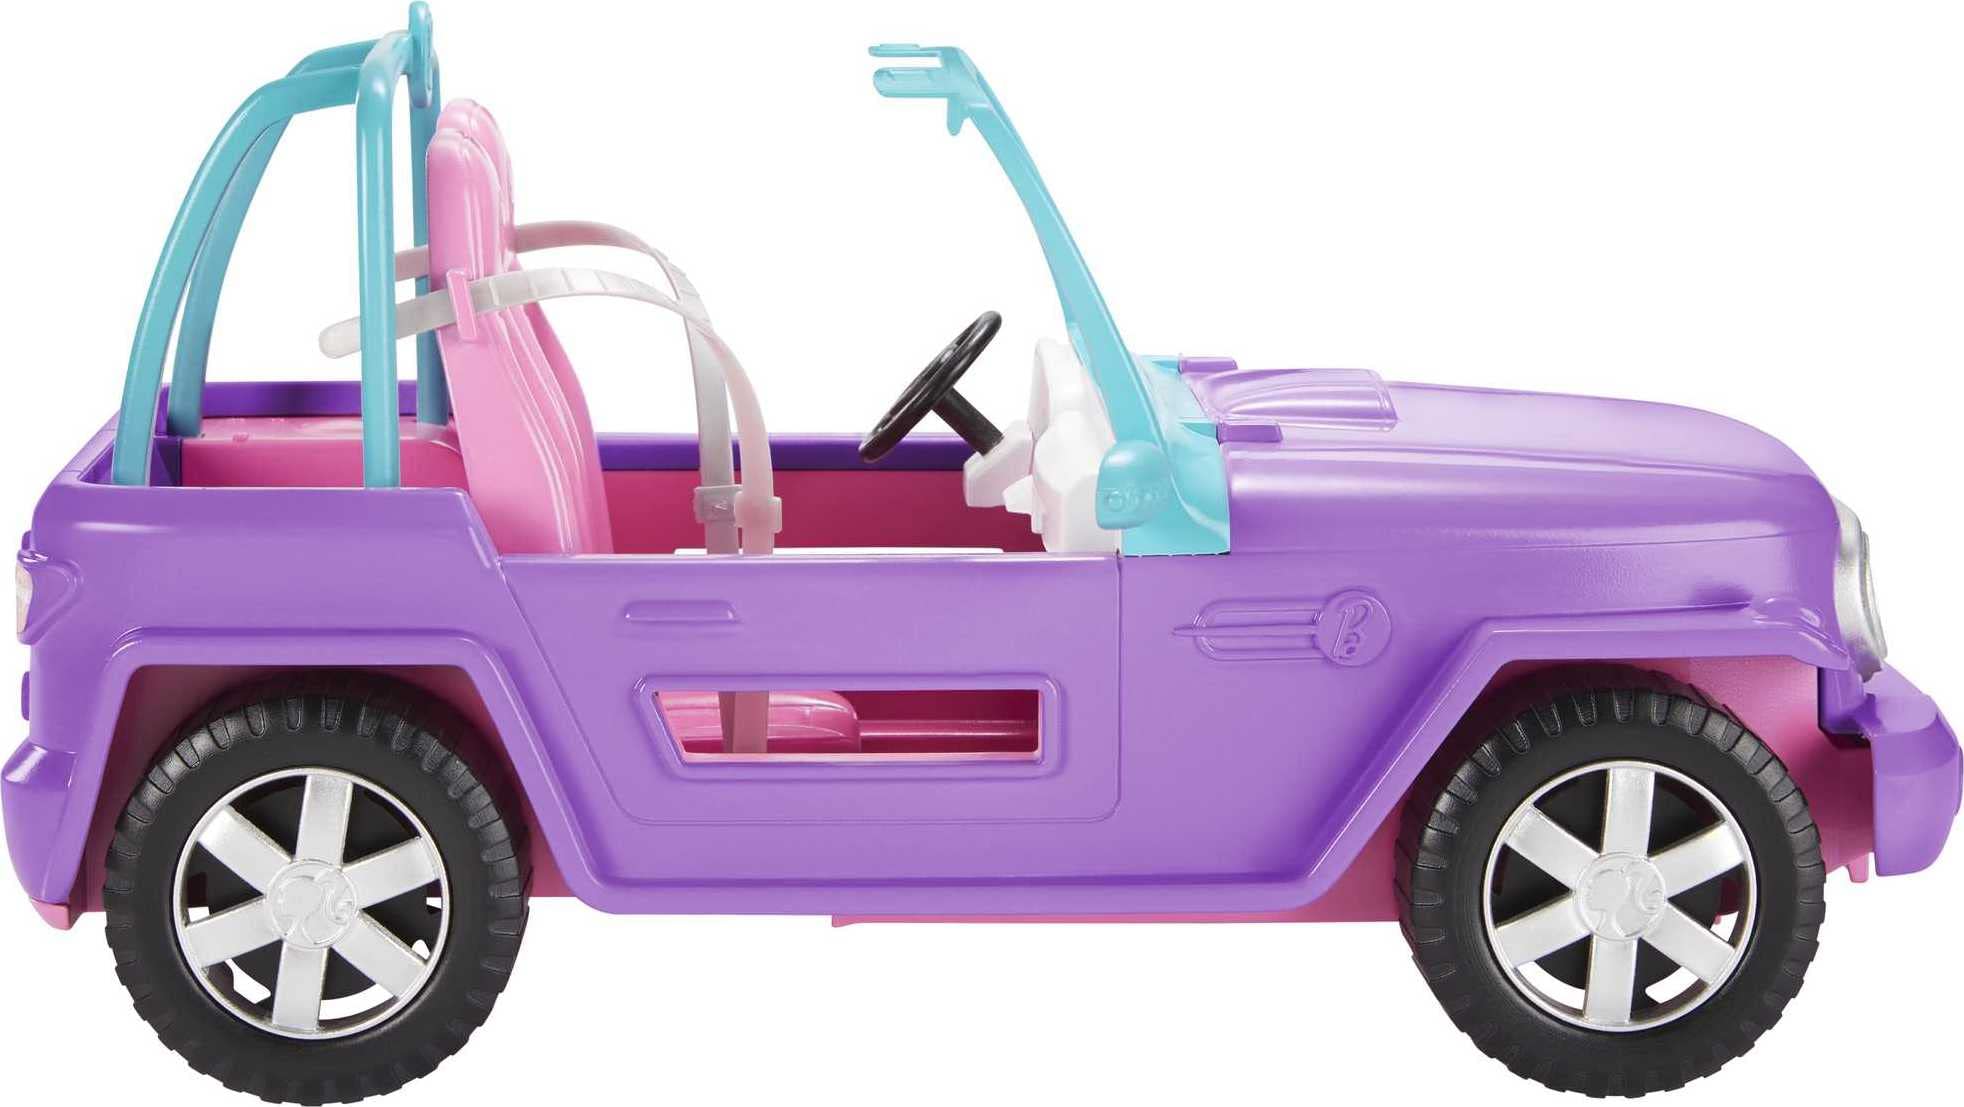 Barbie Toy Car, Purple Off-Road Vehicle with 2 Pink Seats and Treaded, Rolling Wheels